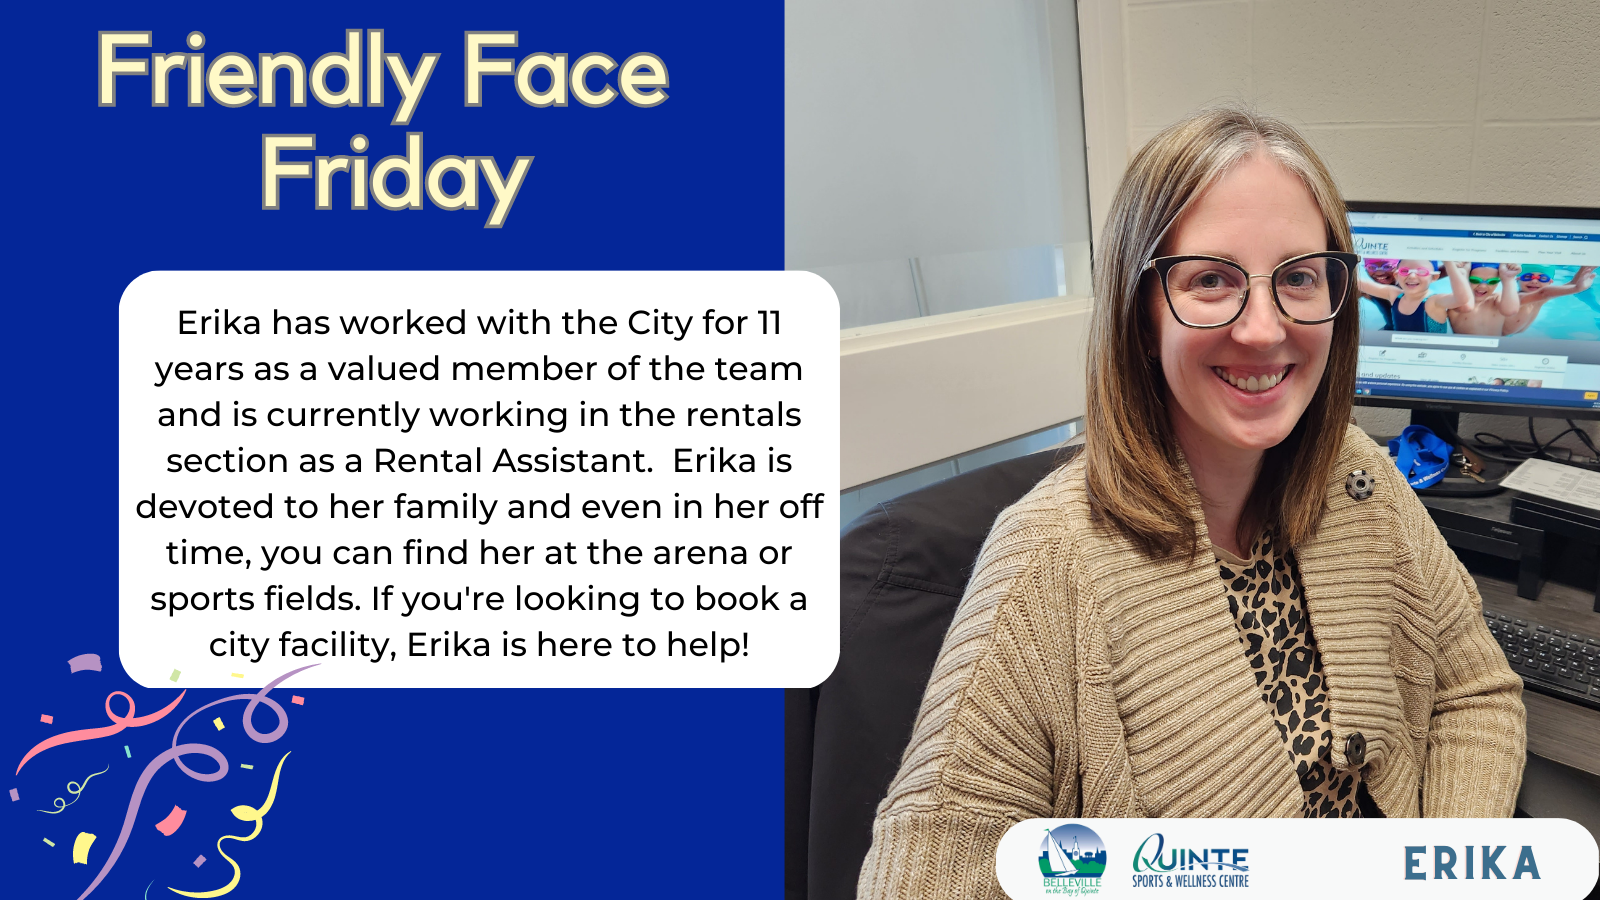 Erika with Friendly Face Friday Friendly Face Friday | Erika has worked with the City for 11 years as a valued member of the team and is currently working in the rentals section as a Rental Assistant.  Erika is devoted to her family and even in her off time, you can find her at the arena or sports fields. If you're looking to book a city facility, Erika is here to help!